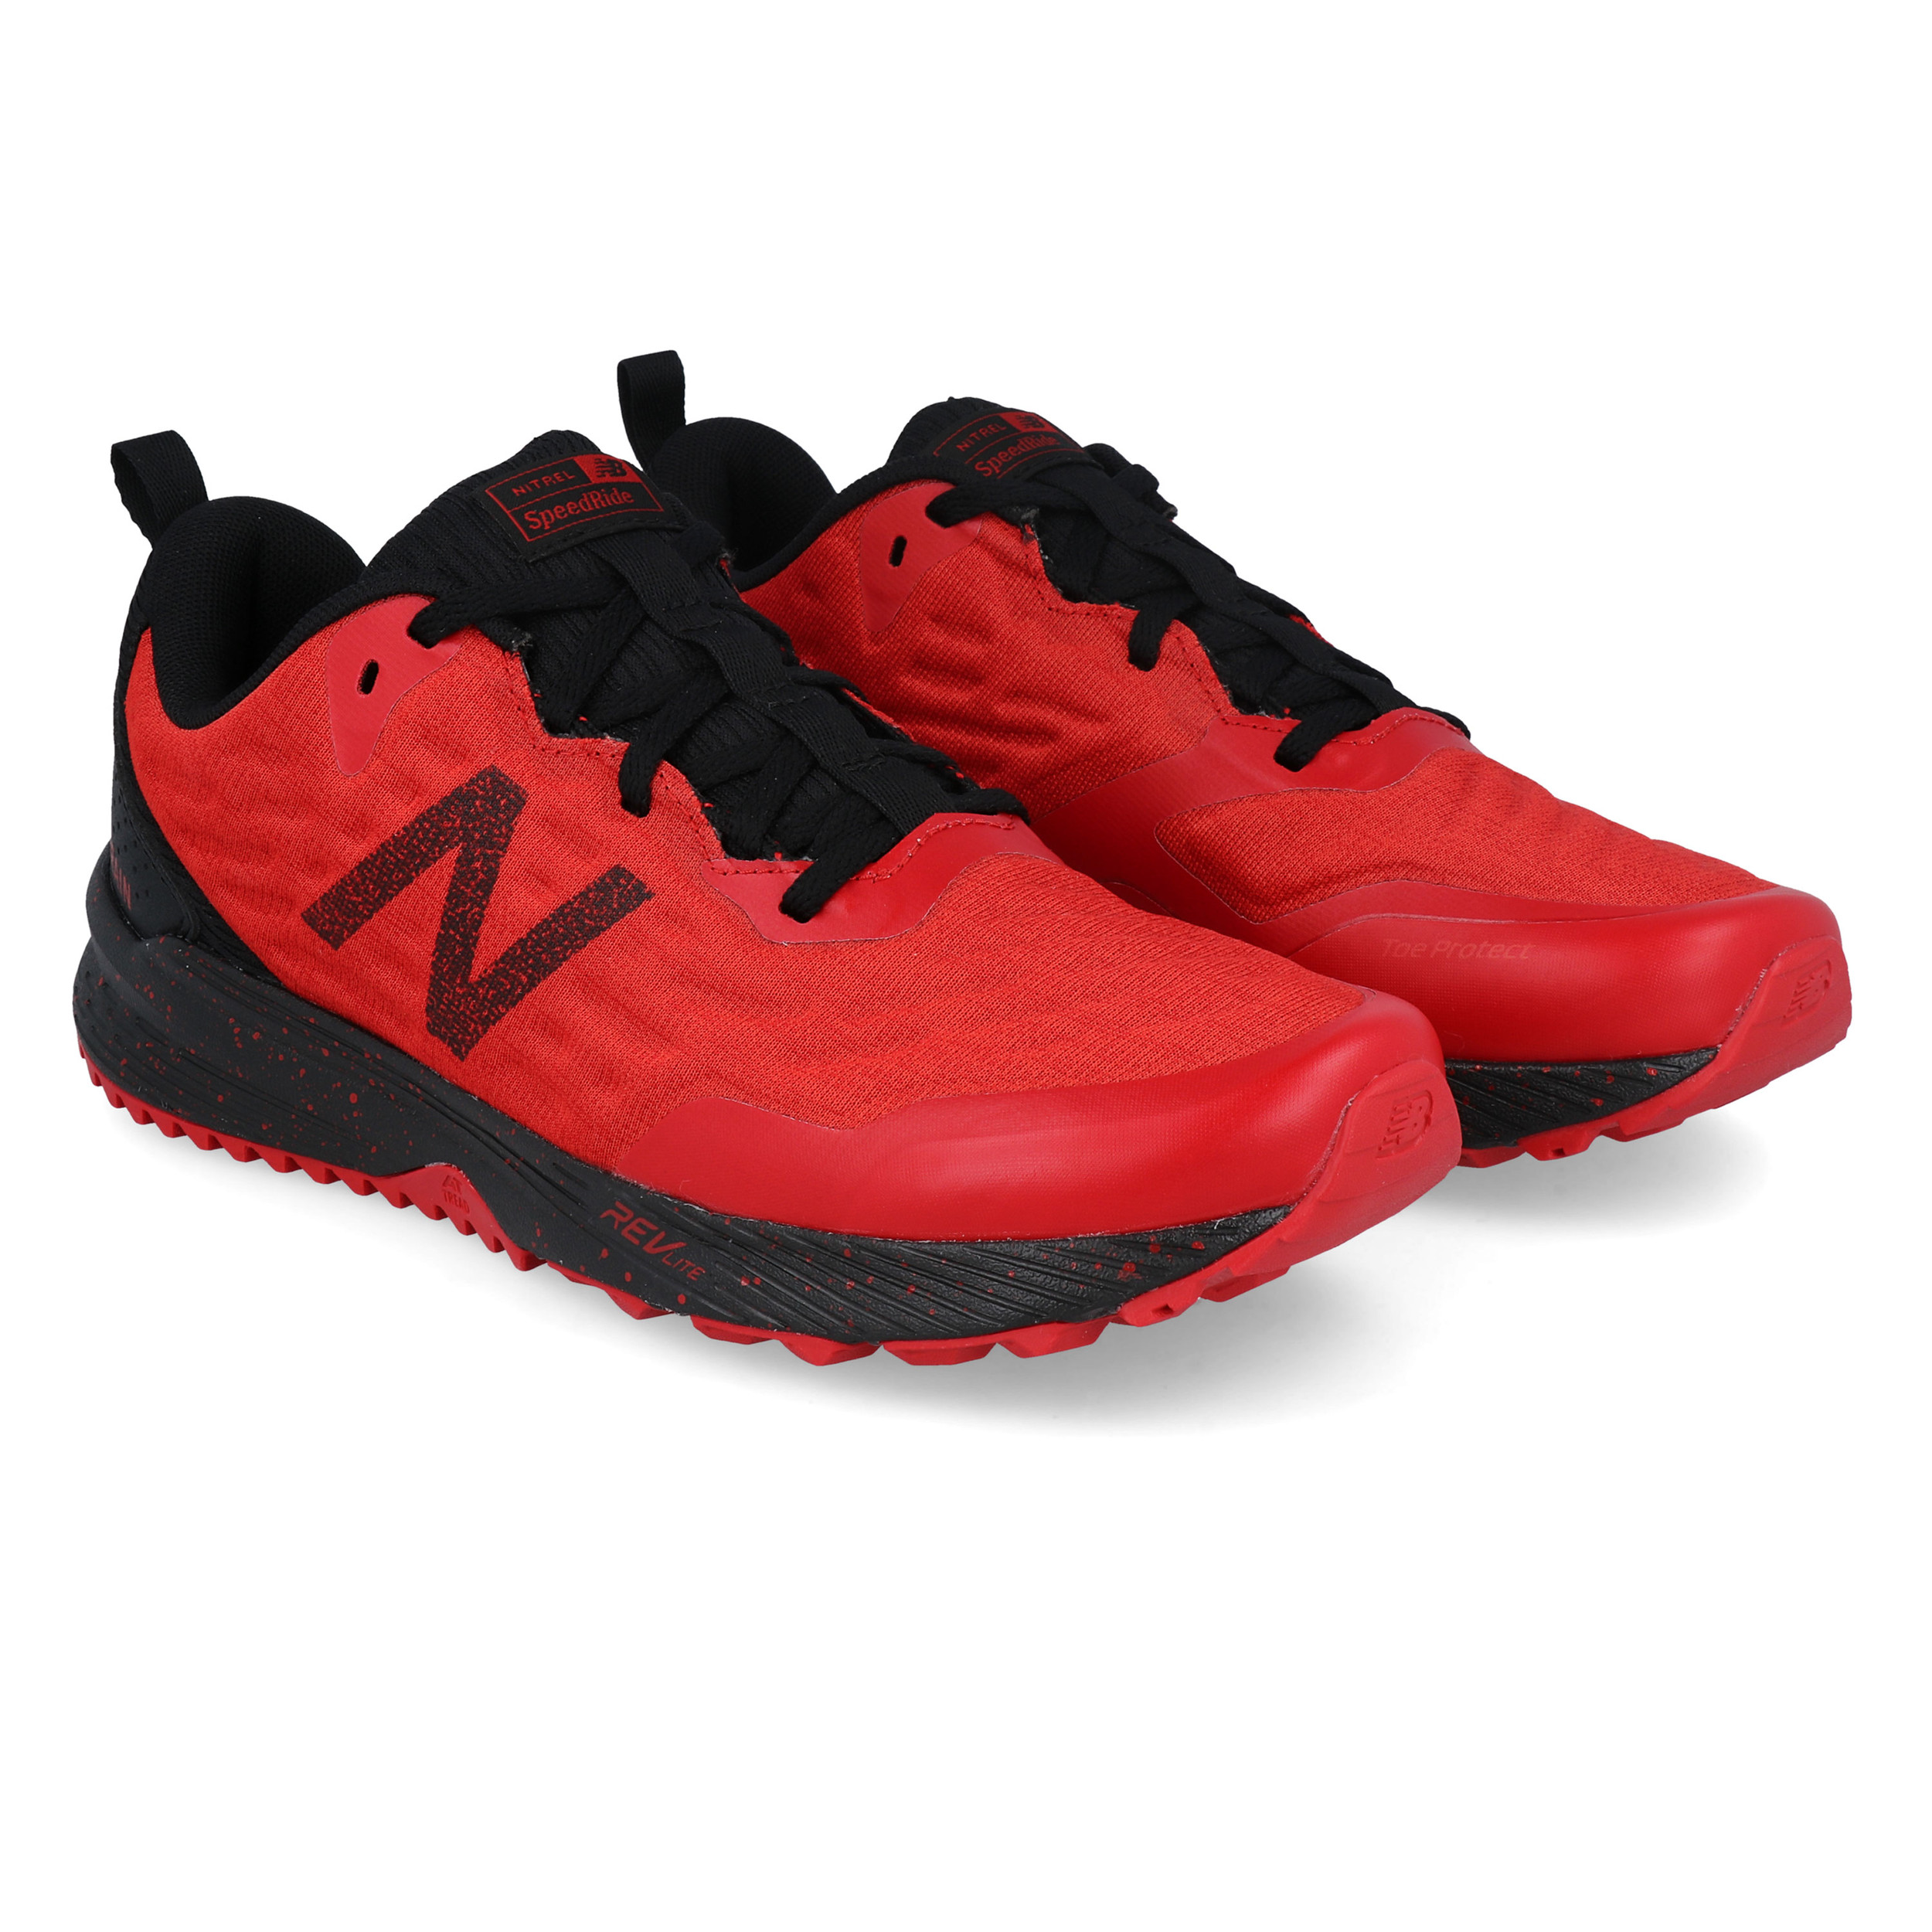 New Balance FuelCore Nitrel v3 Trail Running Shoes